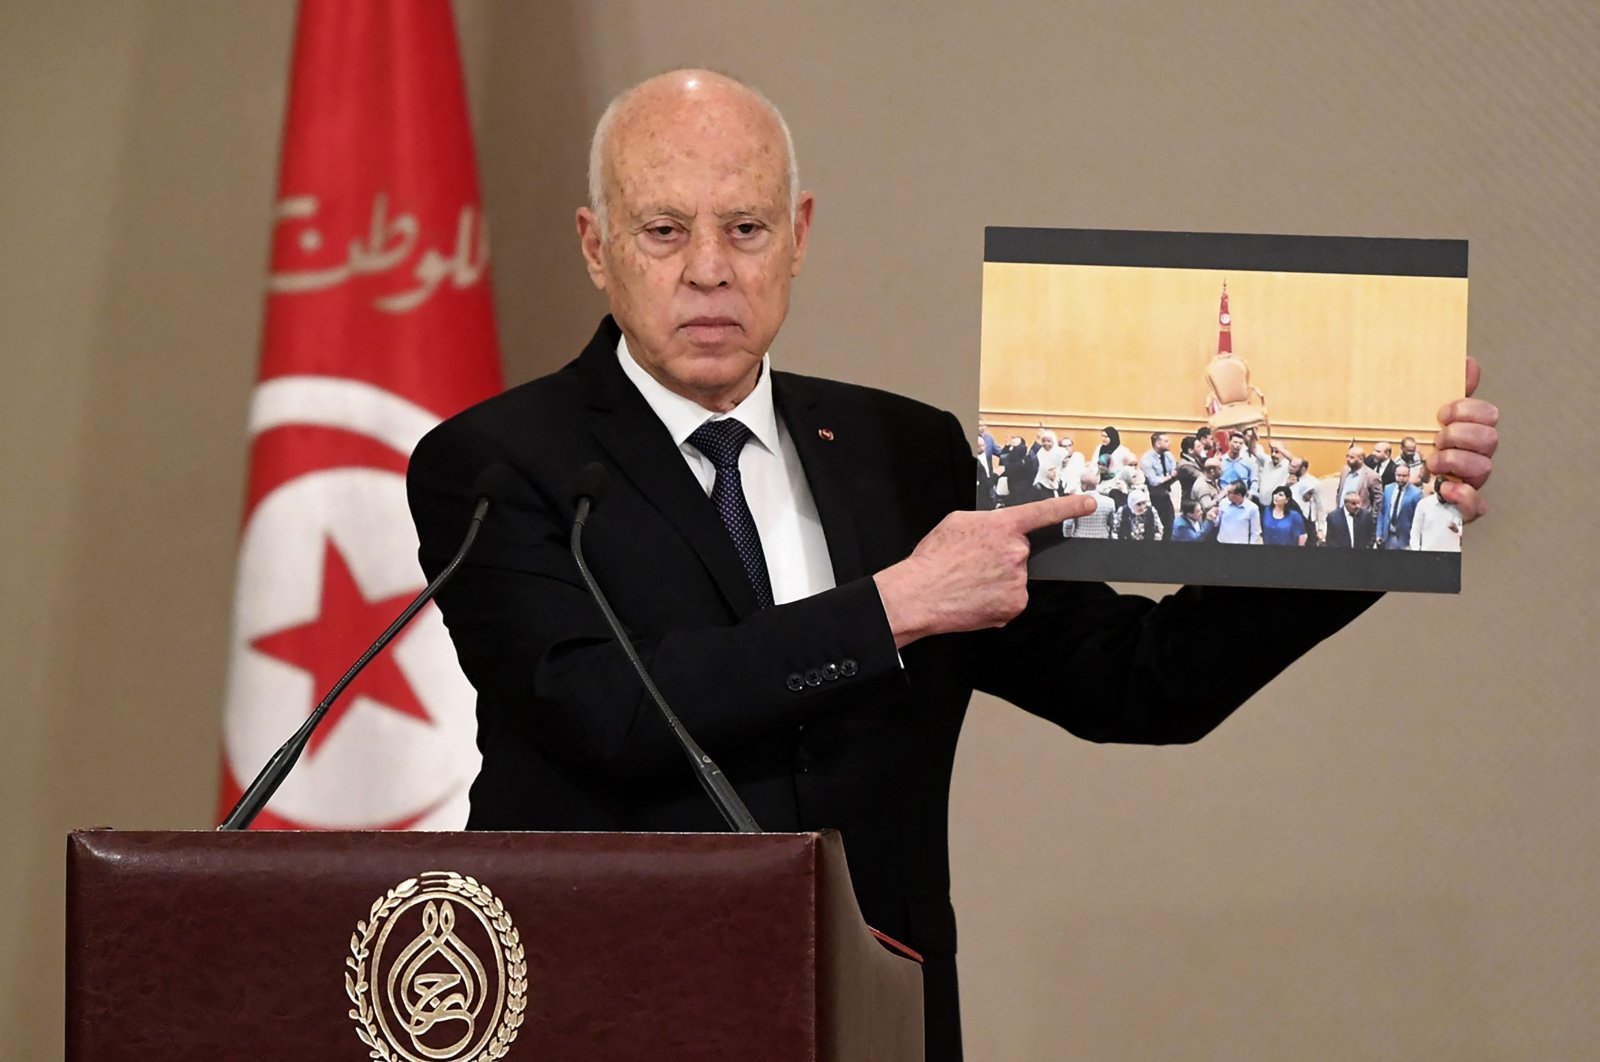 Tunisian President Kais Saied announces the formation of a new government in Tunis, Tunisia, Oct. 11, 2021. (Tunisian Presidency Press Service via AFP)